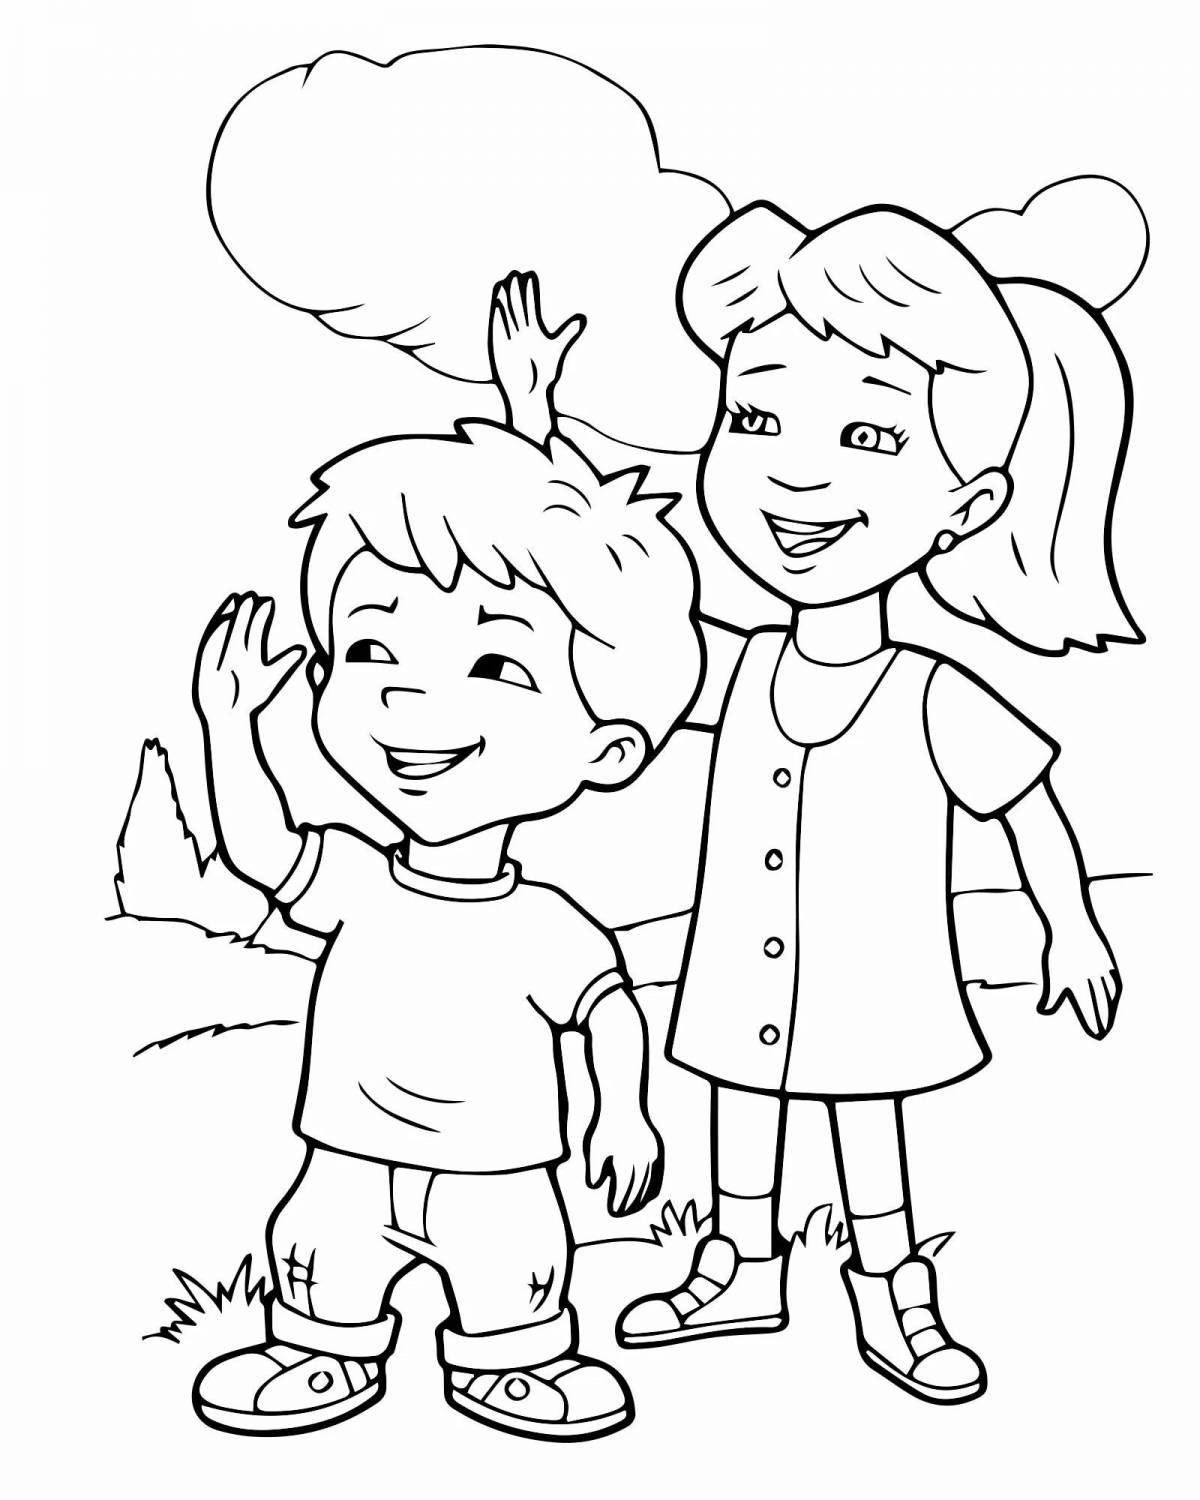 Brother and sister adorable coloring page